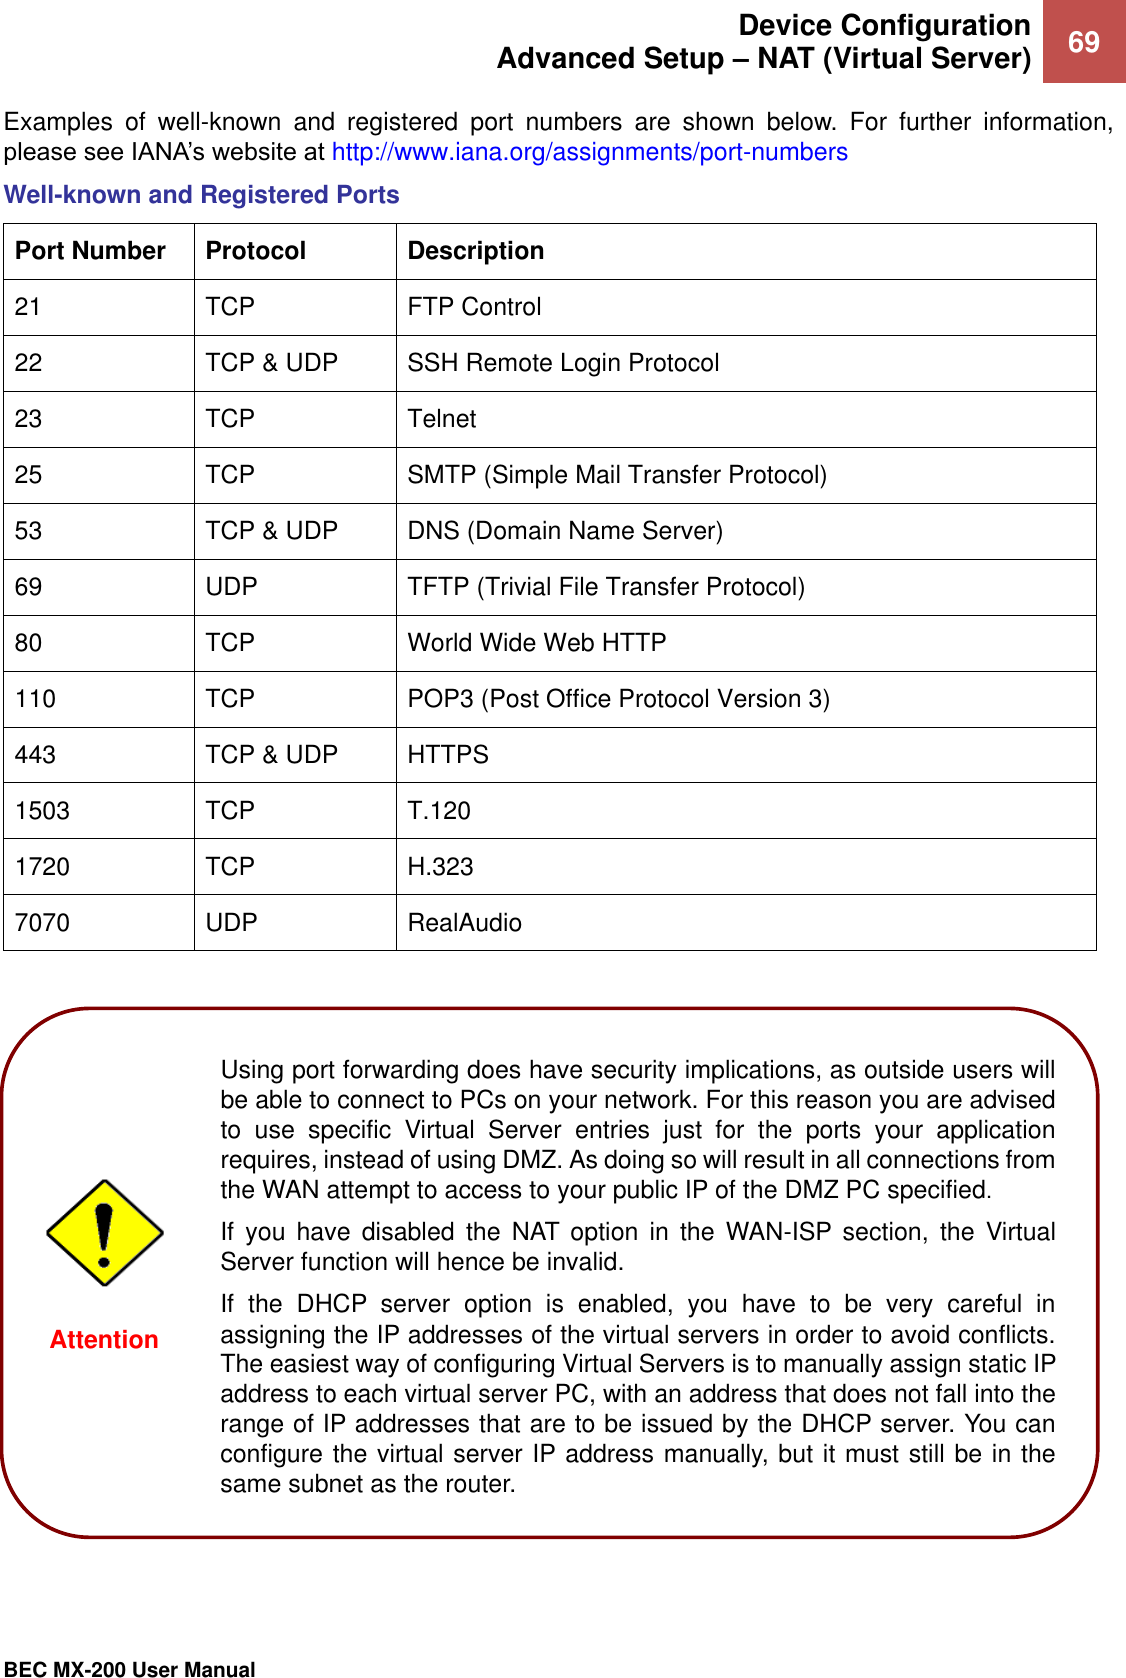  Device Configuration Advanced Setup – NAT (Virtual Server) 69   BEC MX-200 User Manual  Examples  of  well-known  and  registered  port  numbers  are  shown  below.  For  further  information, please see IANA’s website at http://www.iana.org/assignments/port-numbers Well-known and Registered Ports Port Number Protocol Description 21 TCP FTP Control 22 TCP &amp; UDP SSH Remote Login Protocol 23 TCP Telnet 25 TCP SMTP (Simple Mail Transfer Protocol) 53 TCP &amp; UDP DNS (Domain Name Server) 69 UDP TFTP (Trivial File Transfer Protocol) 80 TCP World Wide Web HTTP 110 TCP POP3 (Post Office Protocol Version 3) 443 TCP &amp; UDP HTTPS 1503 TCP T.120 1720 TCP H.323 7070 UDP RealAudio   Using port forwarding does have security implications, as outside users will be able to connect to PCs on your network. For this reason you are advised to  use  specific  Virtual  Server  entries  just  for  the  ports  your  application requires, instead of using DMZ. As doing so will result in all connections from the WAN attempt to access to your public IP of the DMZ PC specified. If  you  have  disabled  the  NAT  option  in  the  WAN-ISP  section,  the  Virtual Server function will hence be invalid. If  the  DHCP  server  option  is  enabled,  you  have  to  be  very  careful  in assigning the IP addresses of the virtual servers in order to avoid conflicts. The easiest way of configuring Virtual Servers is to manually assign static IP address to each virtual server PC, with an address that does not fall into the range of IP addresses that are to be issued by the DHCP server. You can configure the virtual server IP address manually, but it must still be in the same subnet as the router. Attention 